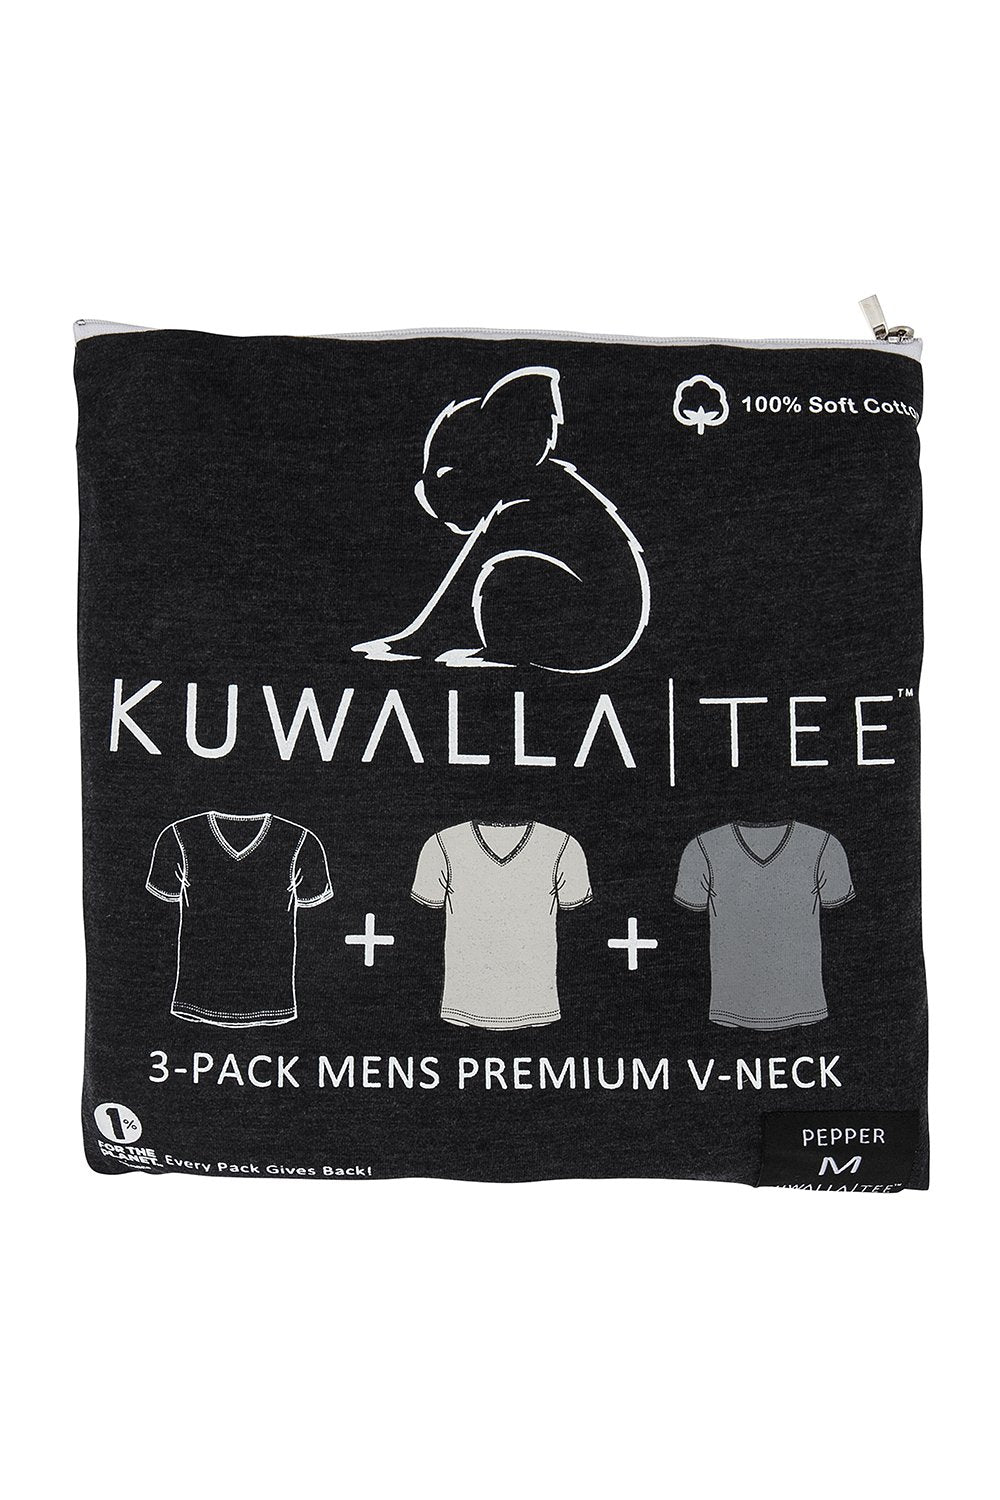 Package of Kuwalla Tee 3-pack of v-neck t-shirts in shades of grey